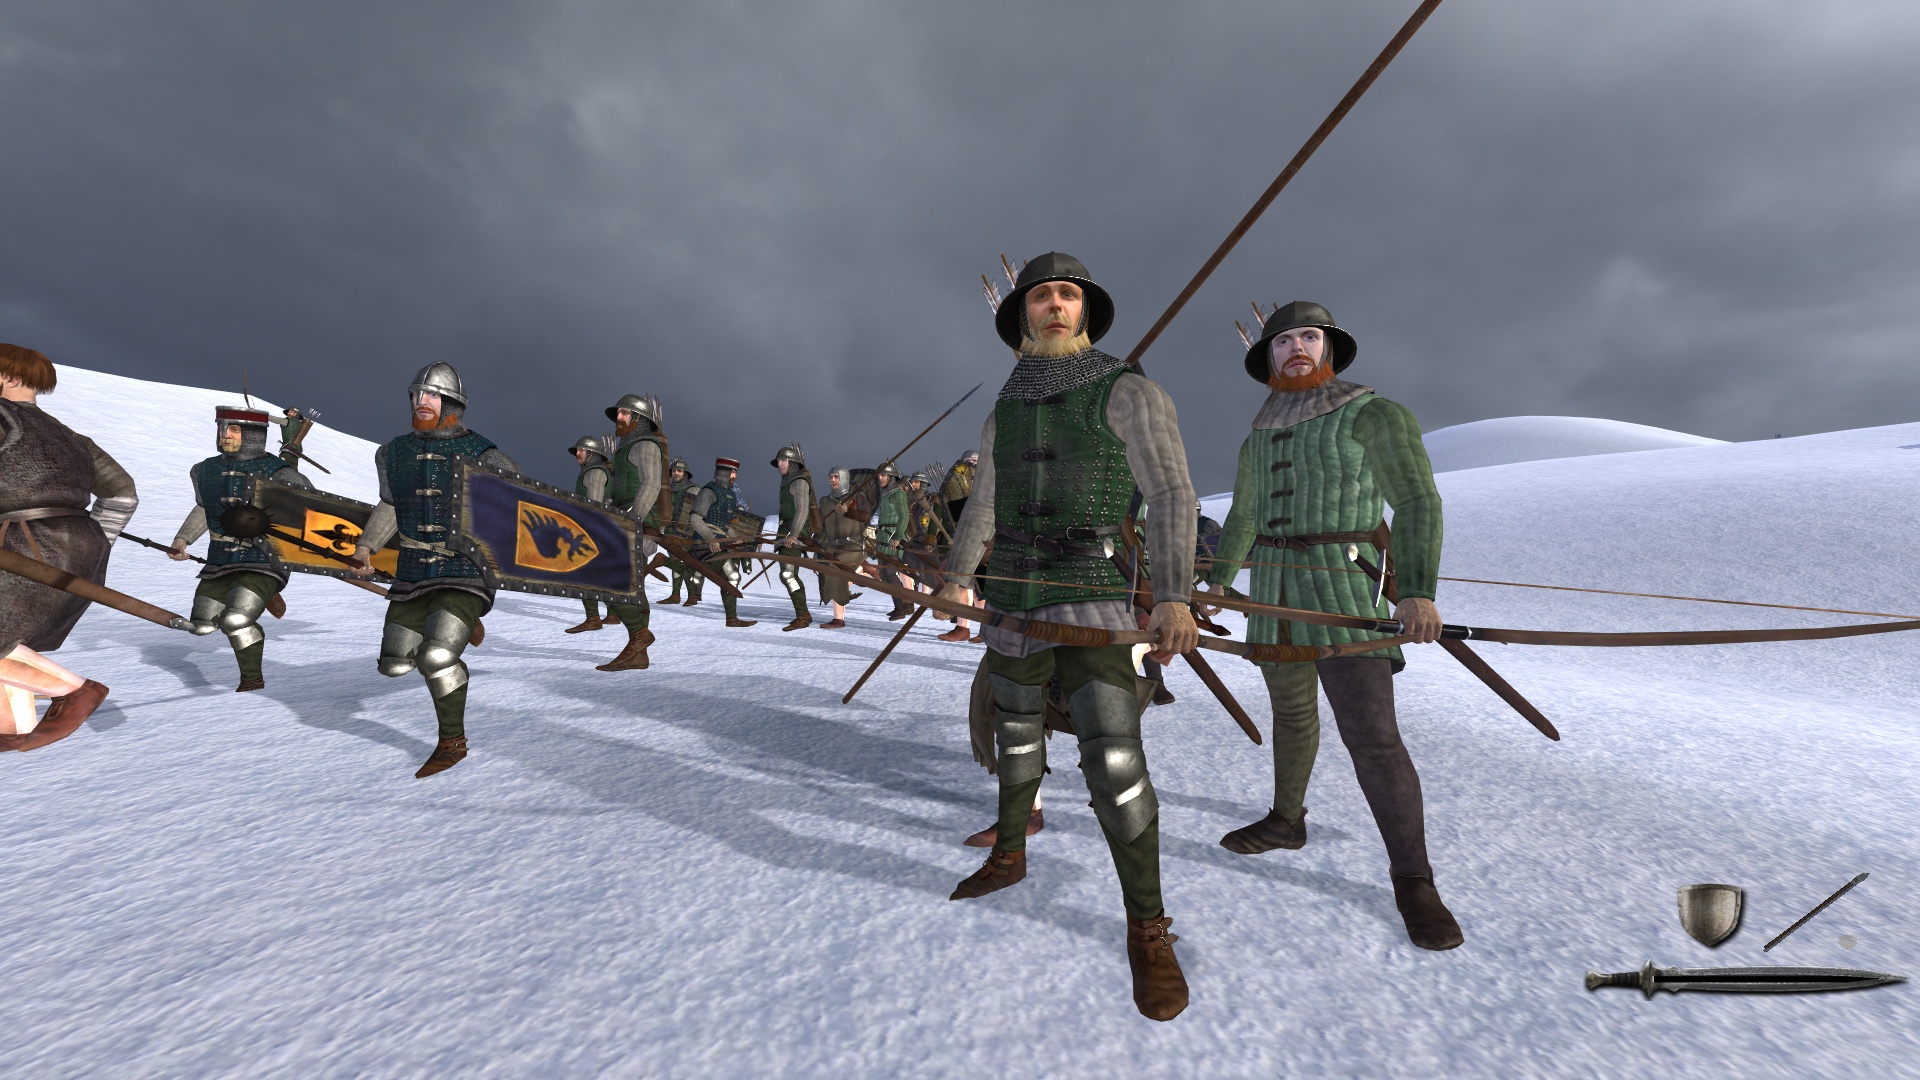 Warband warsword. Warband Warsword Conquest. Mount and Blade Warsword Conquest. Mount and Blade Warband Warsword Conquest. Mount and Blade разбойники.